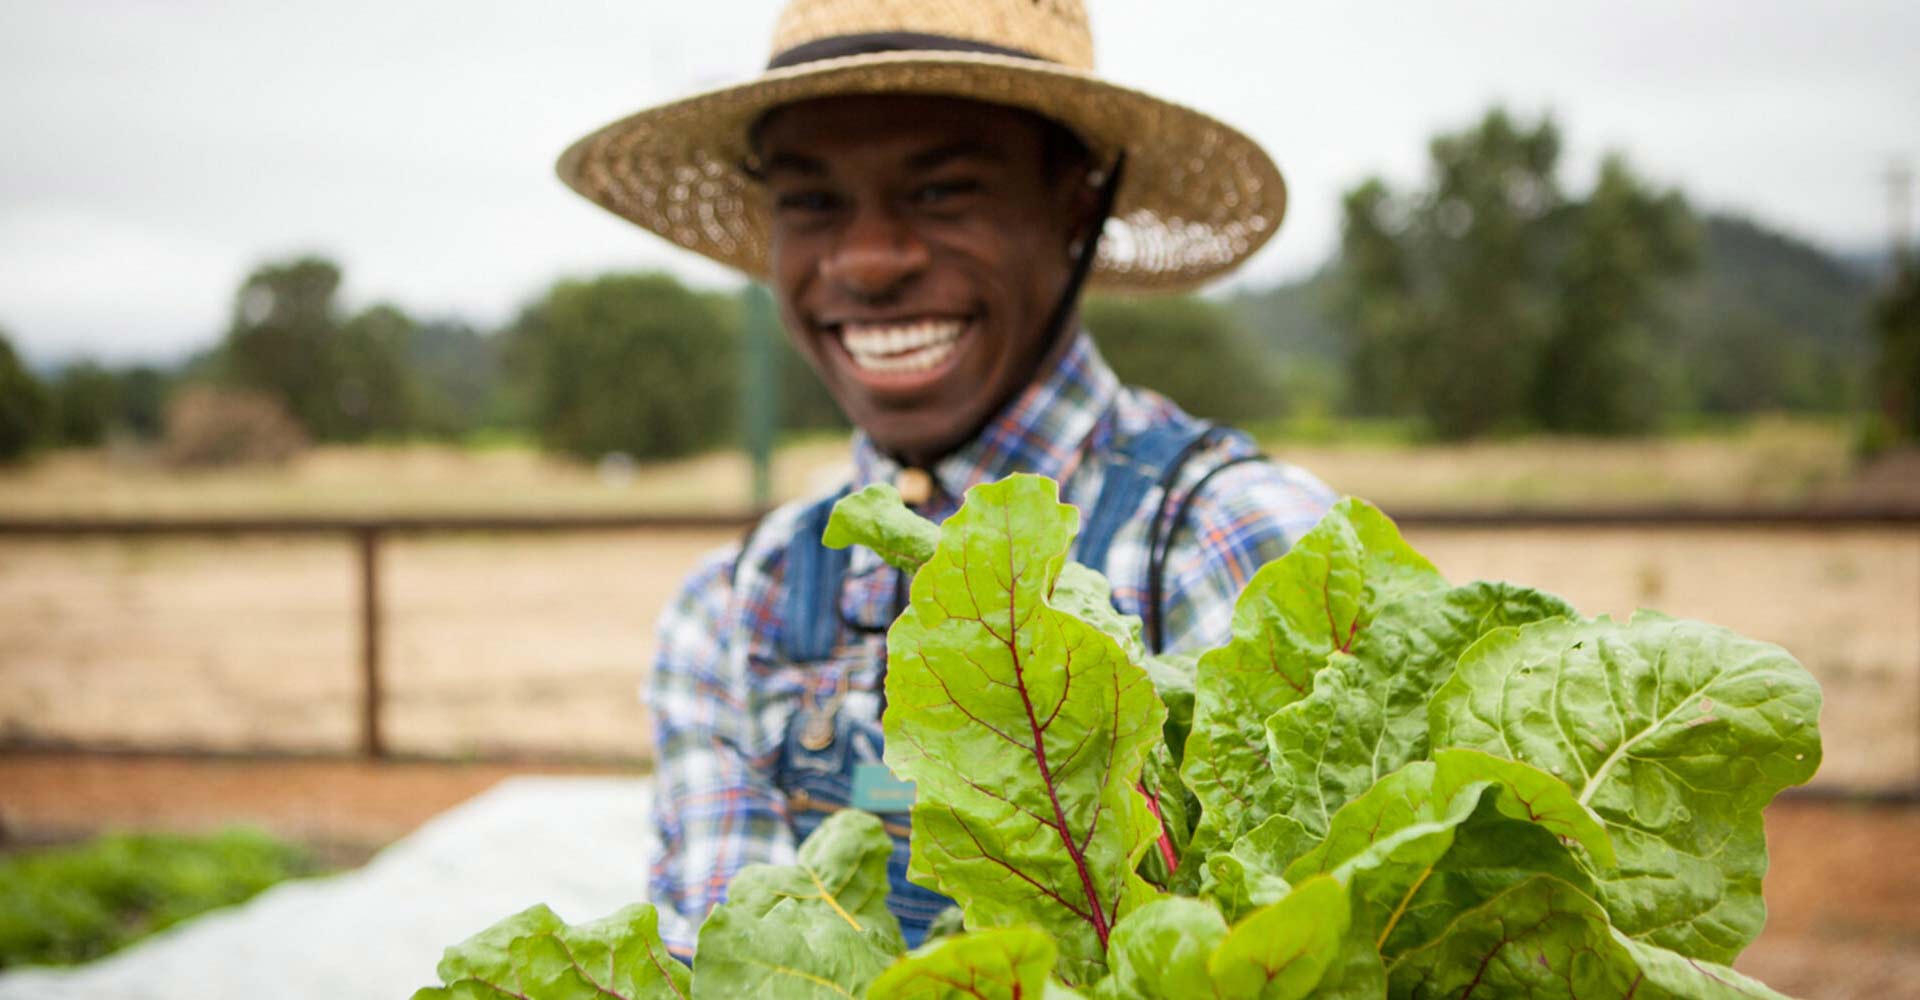 Smiling CIA master's degree student on a farm.